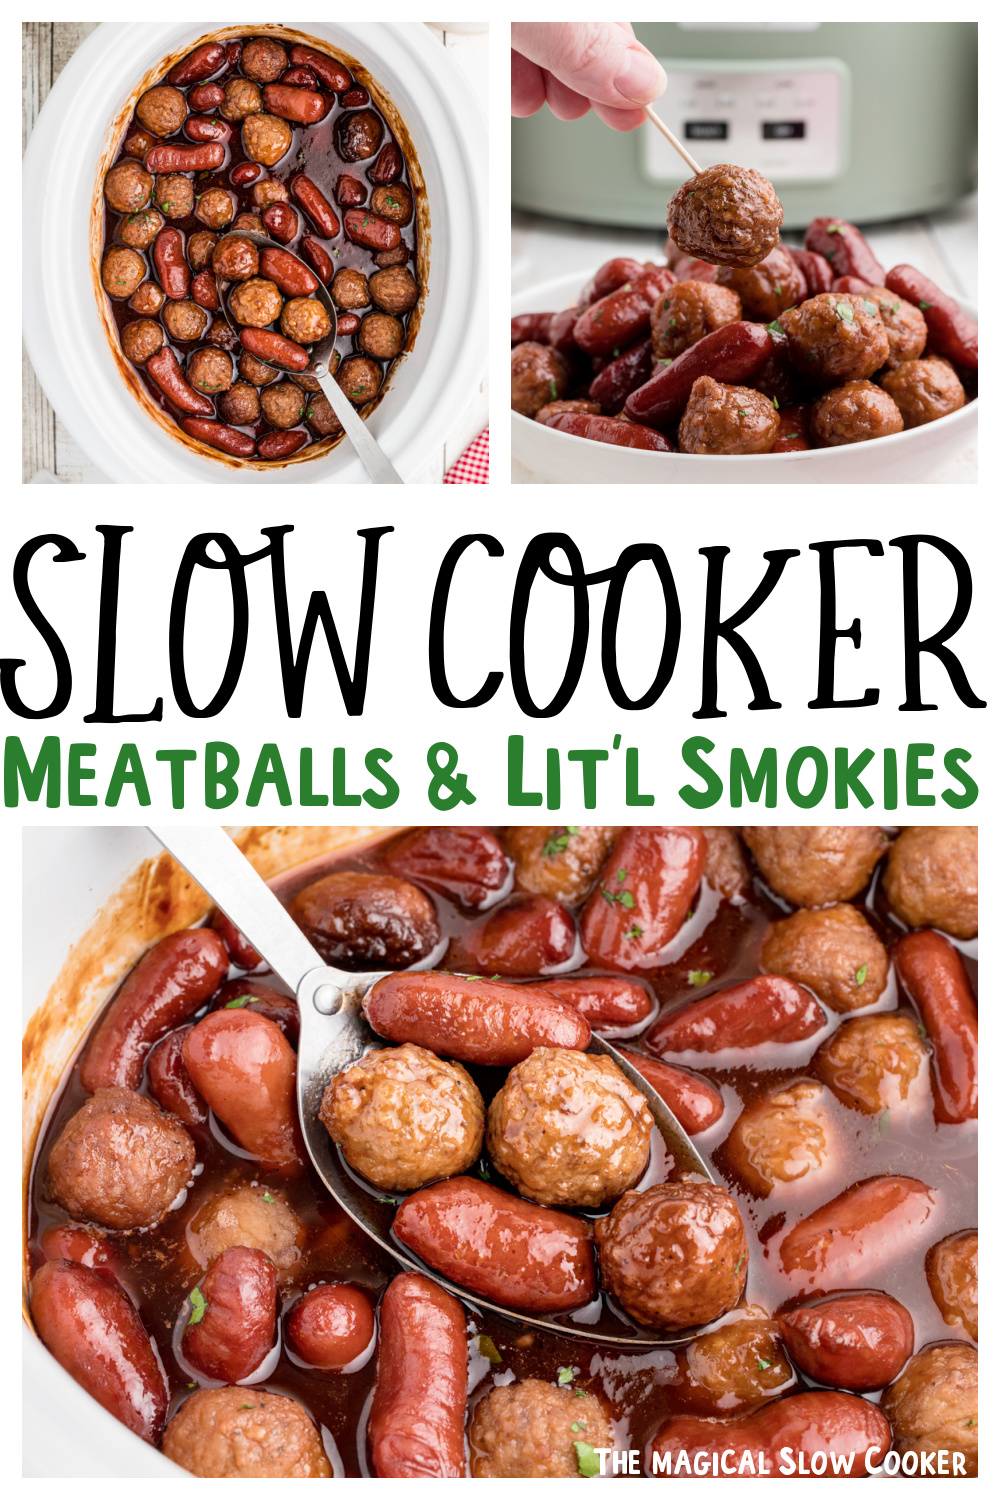 collage of meatballs and little smokies with text overlay.